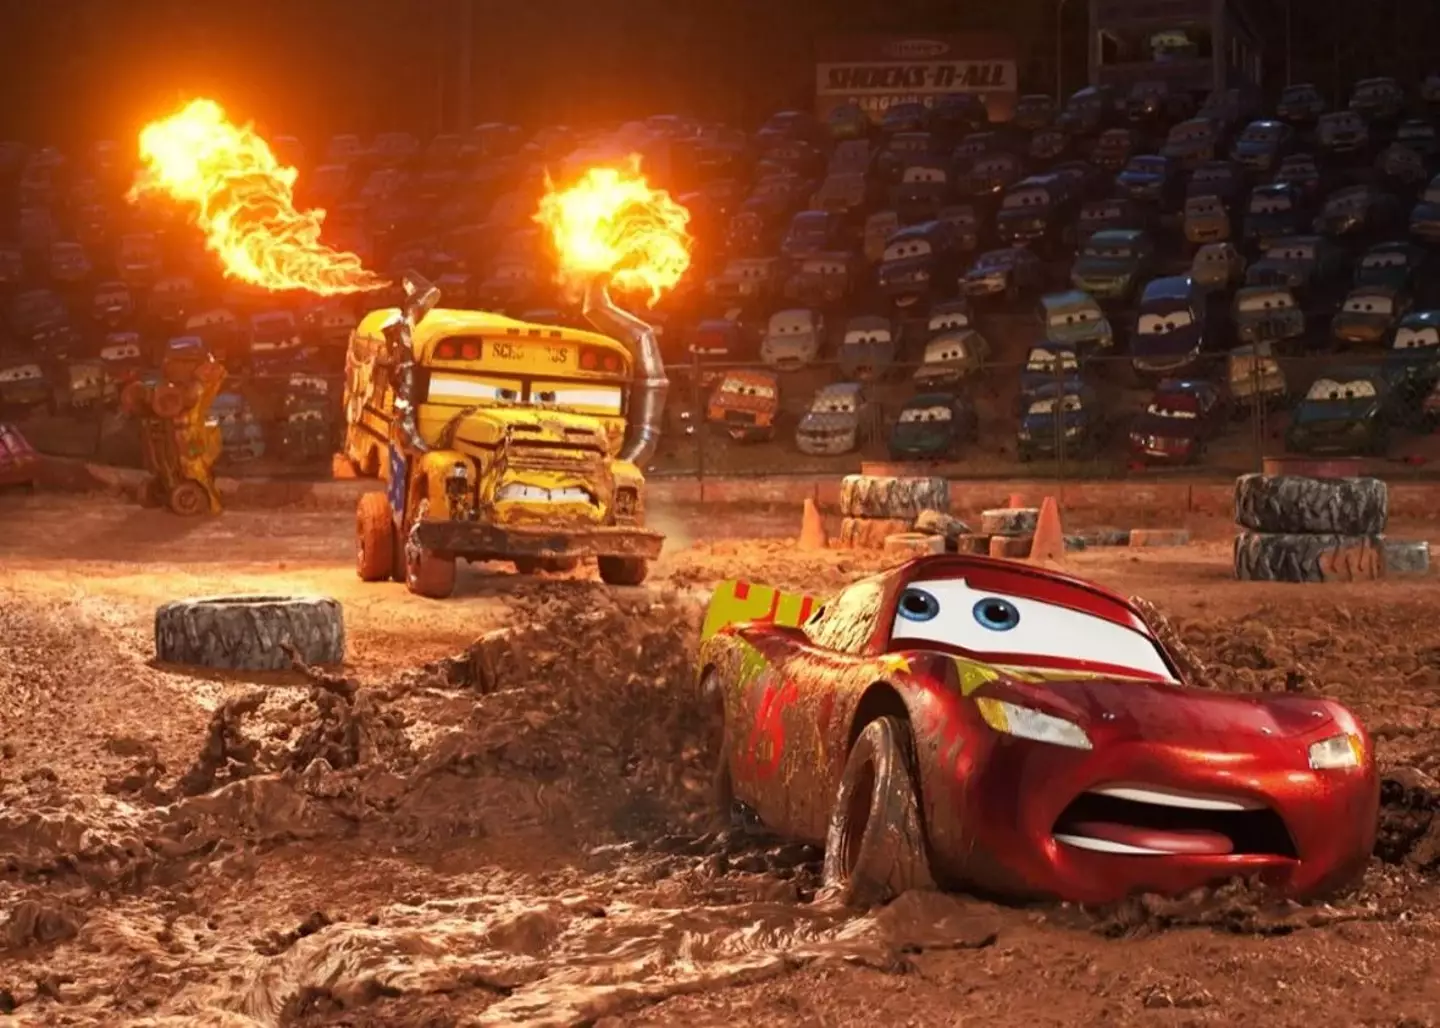 The third instalment of the Cars trilogy crashed out among fans.